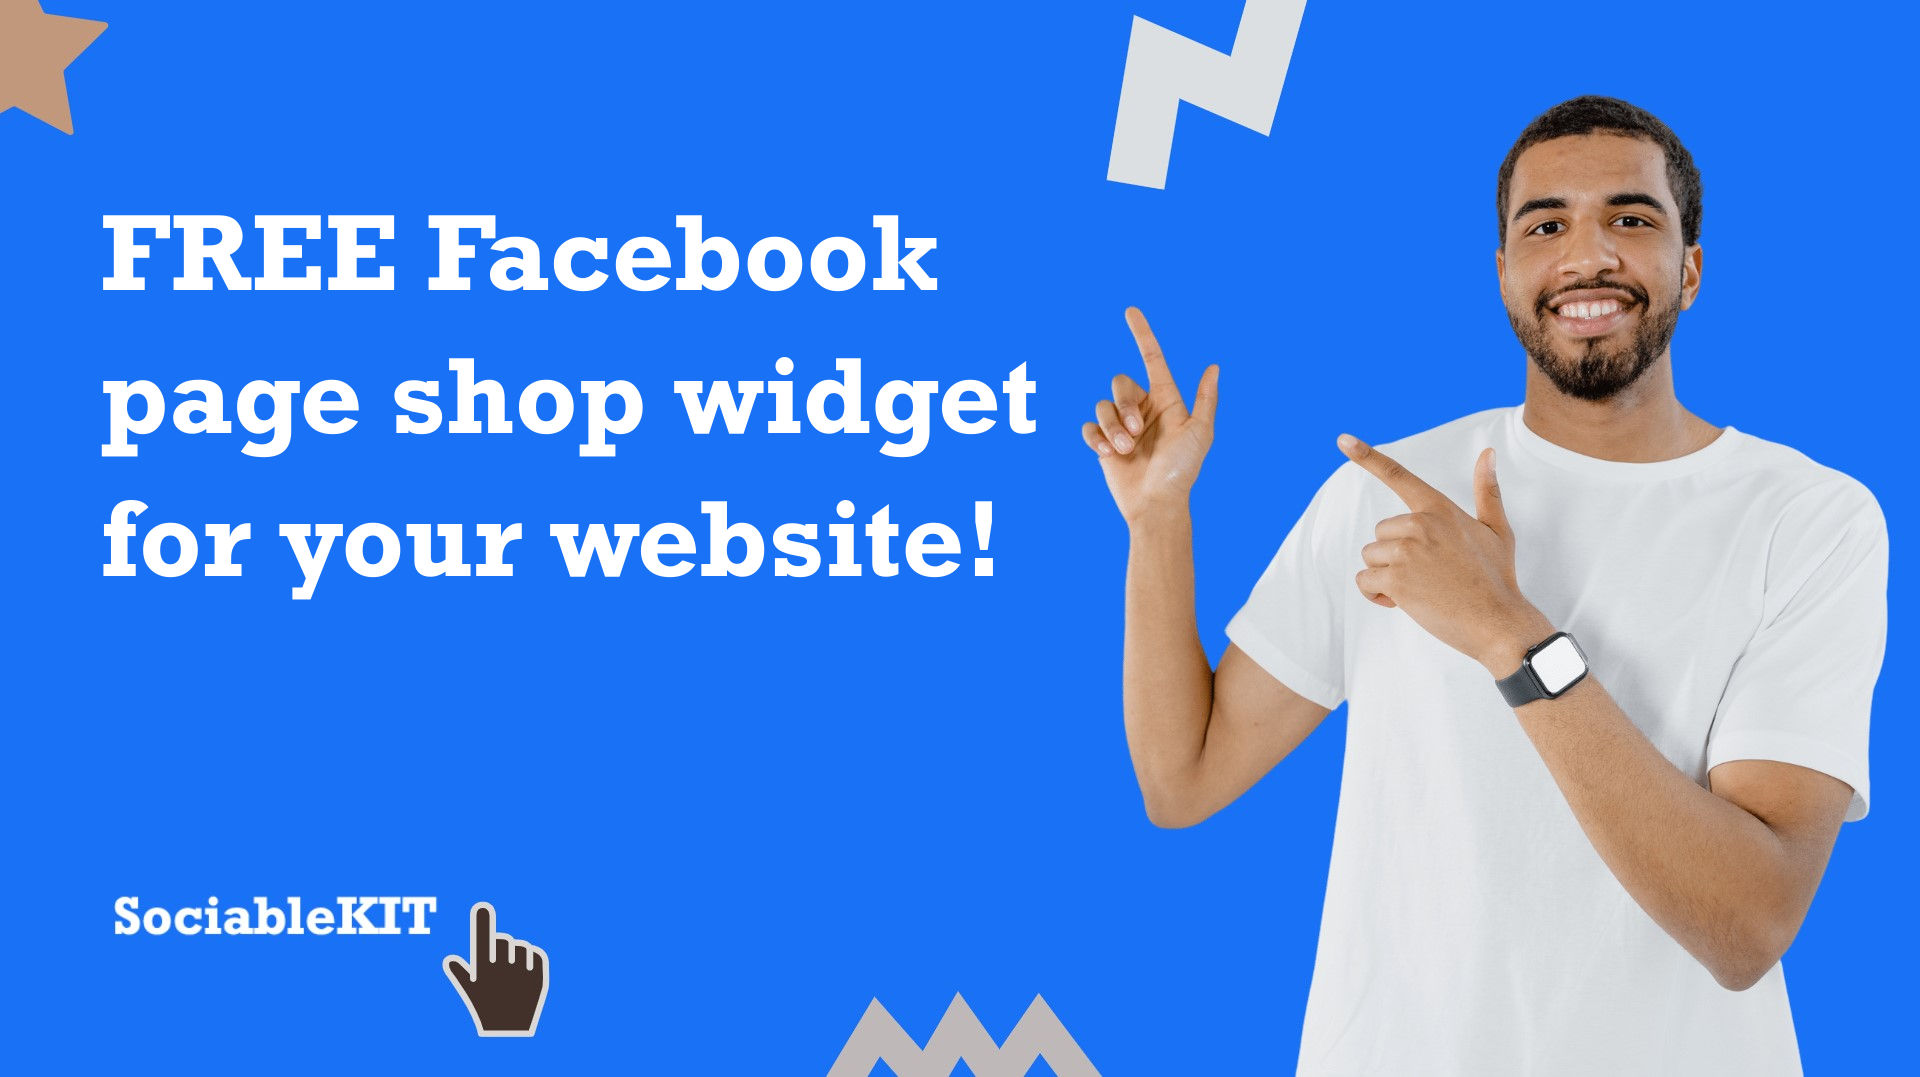 Free Facebook page shop widget for your website